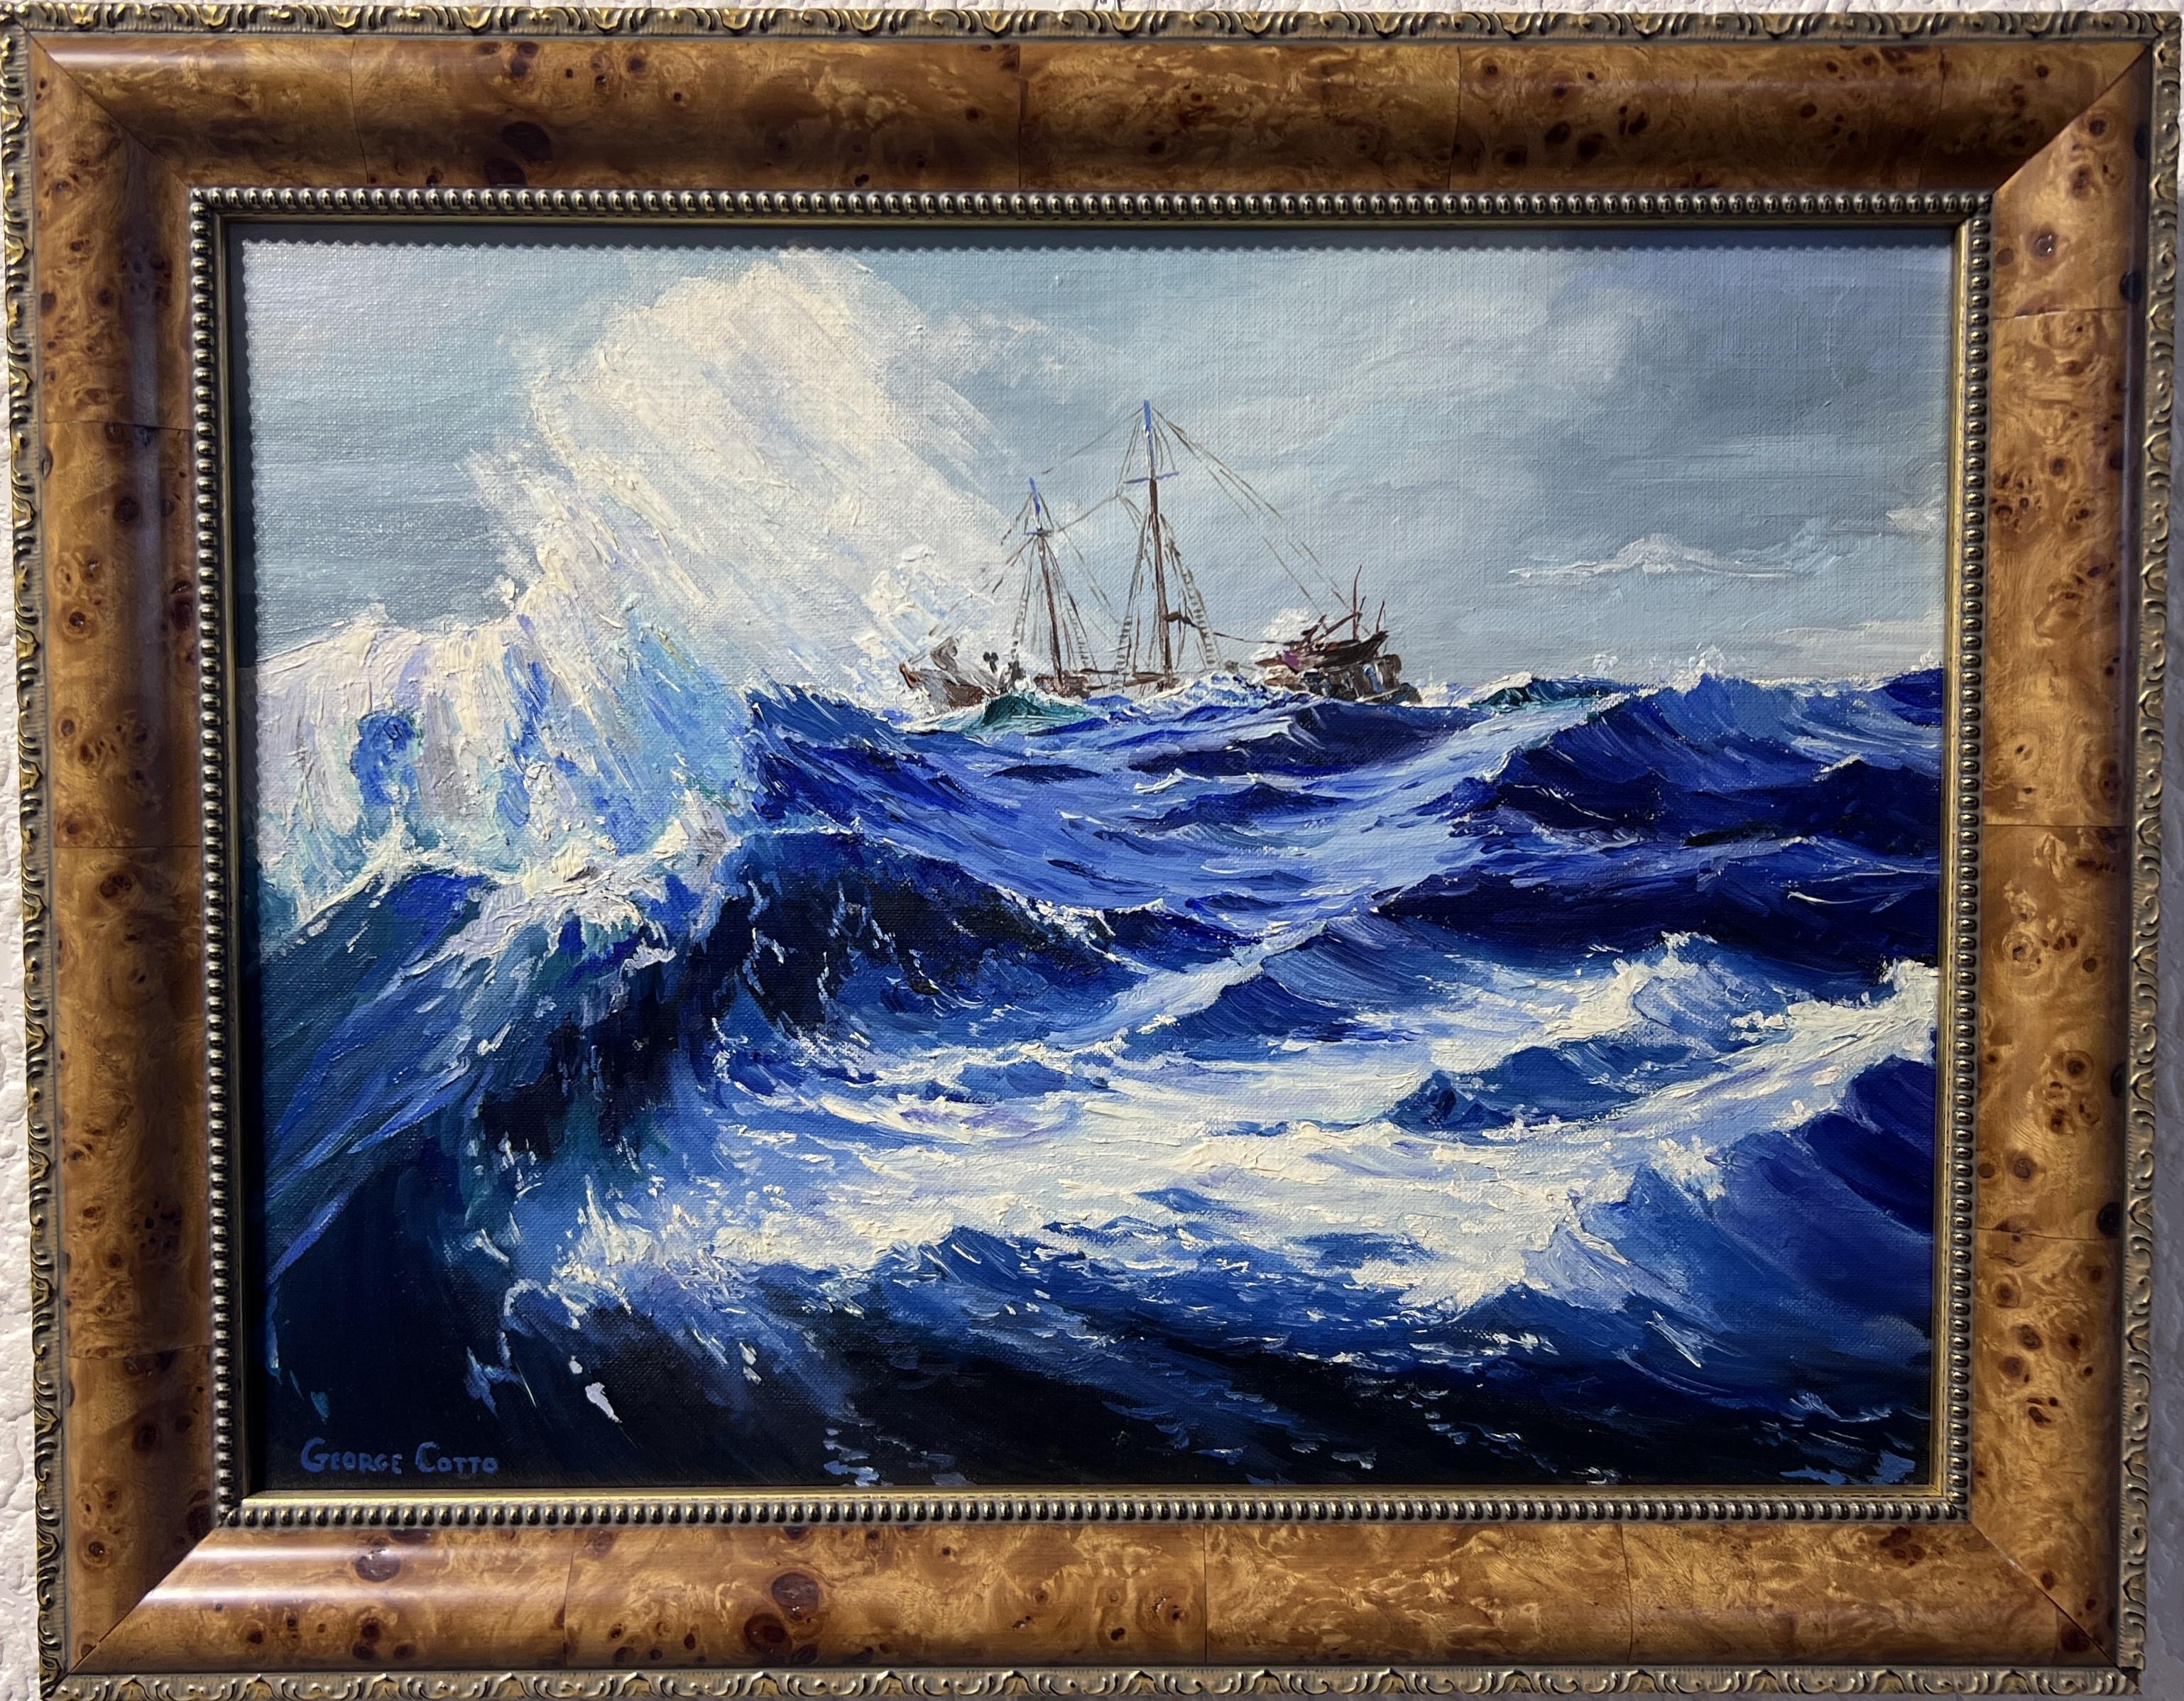 This is an original oil painting on canvas depicting  Sailing Ships on the Stormy ocean. 

Framed measuring 19" x 15" & painting measures 16" x 12". 

Nicely framed. Good condition.
Please see the photos, photos are part of the description.
Signed